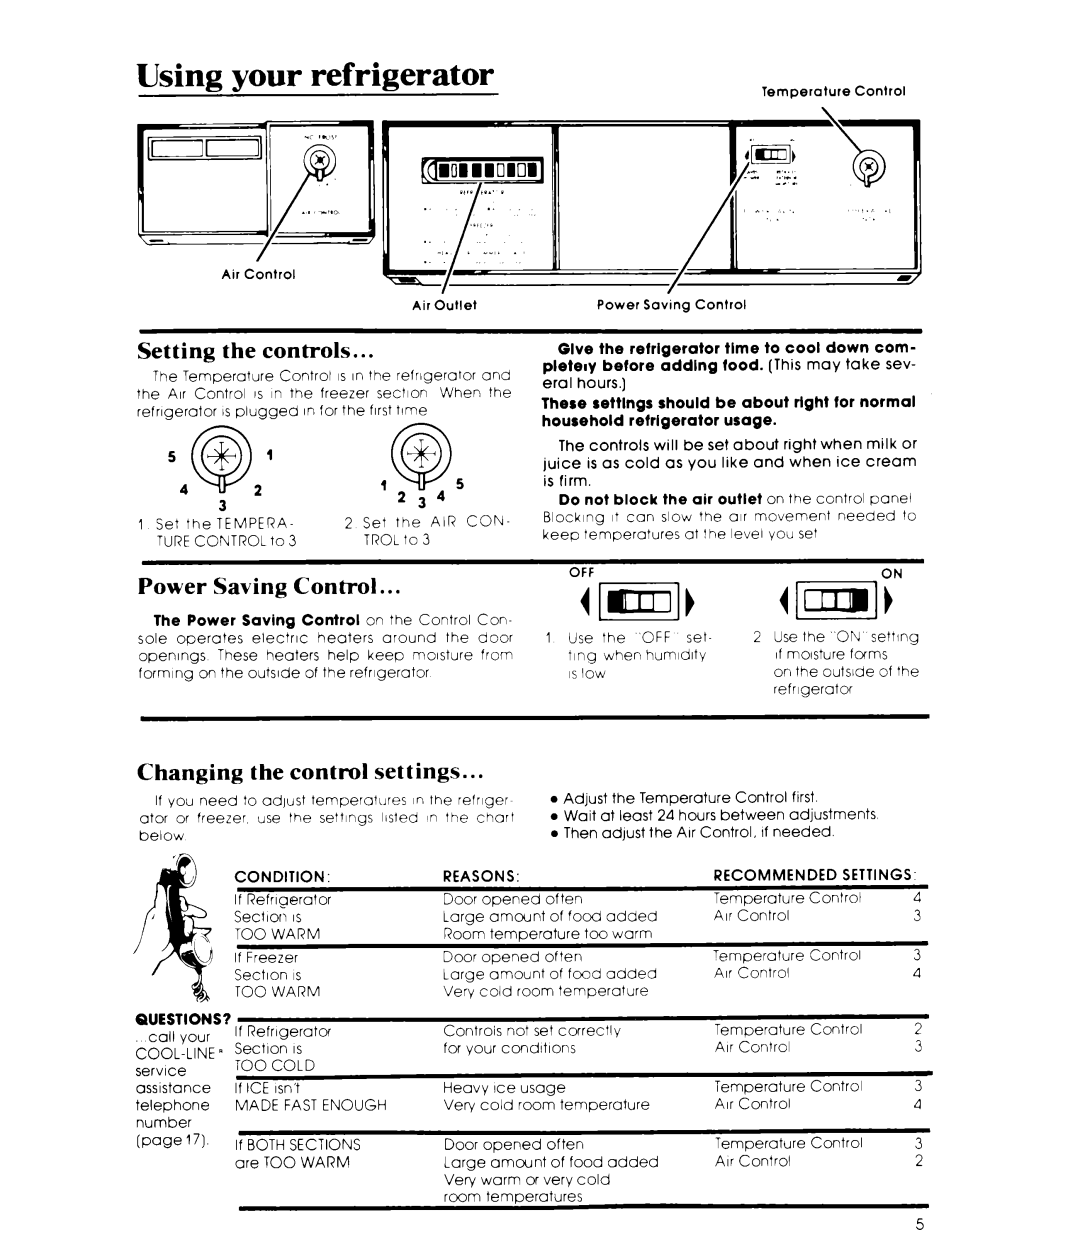 Whirlpool ED22MM manual Using your refrigerator, Setting the controls, Power Saving Control, Changing the control settings 